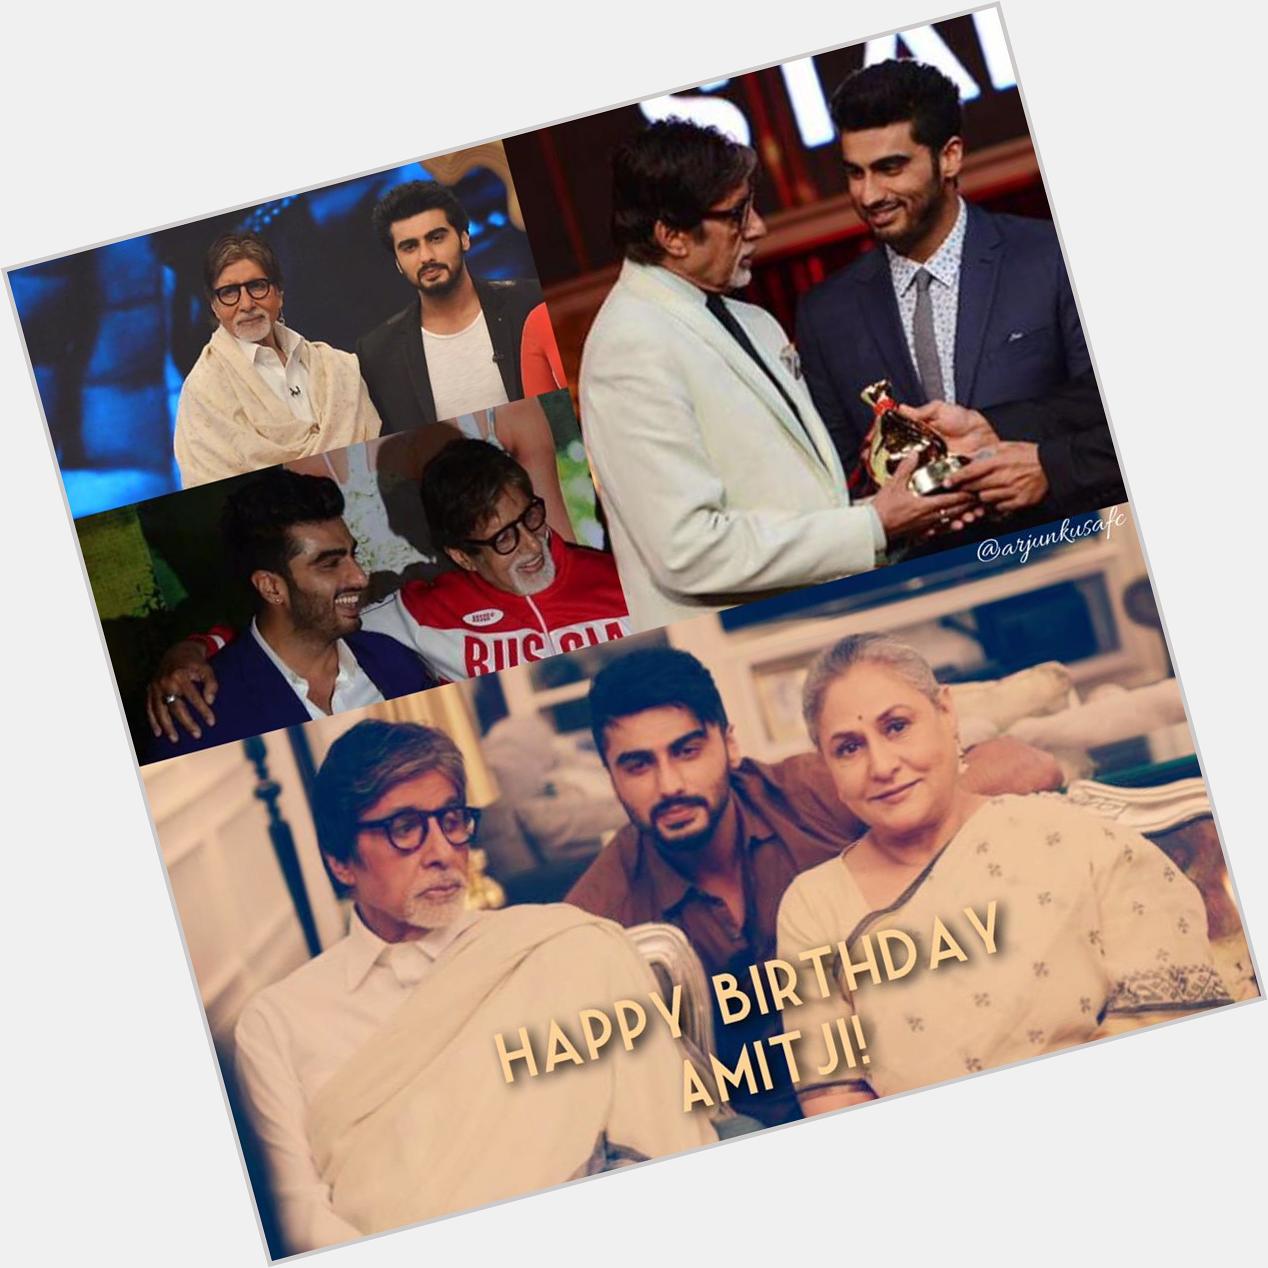 Wishing a very happy, healthy and blessed birthday to Mr. Amitabh Bachchan sir!    